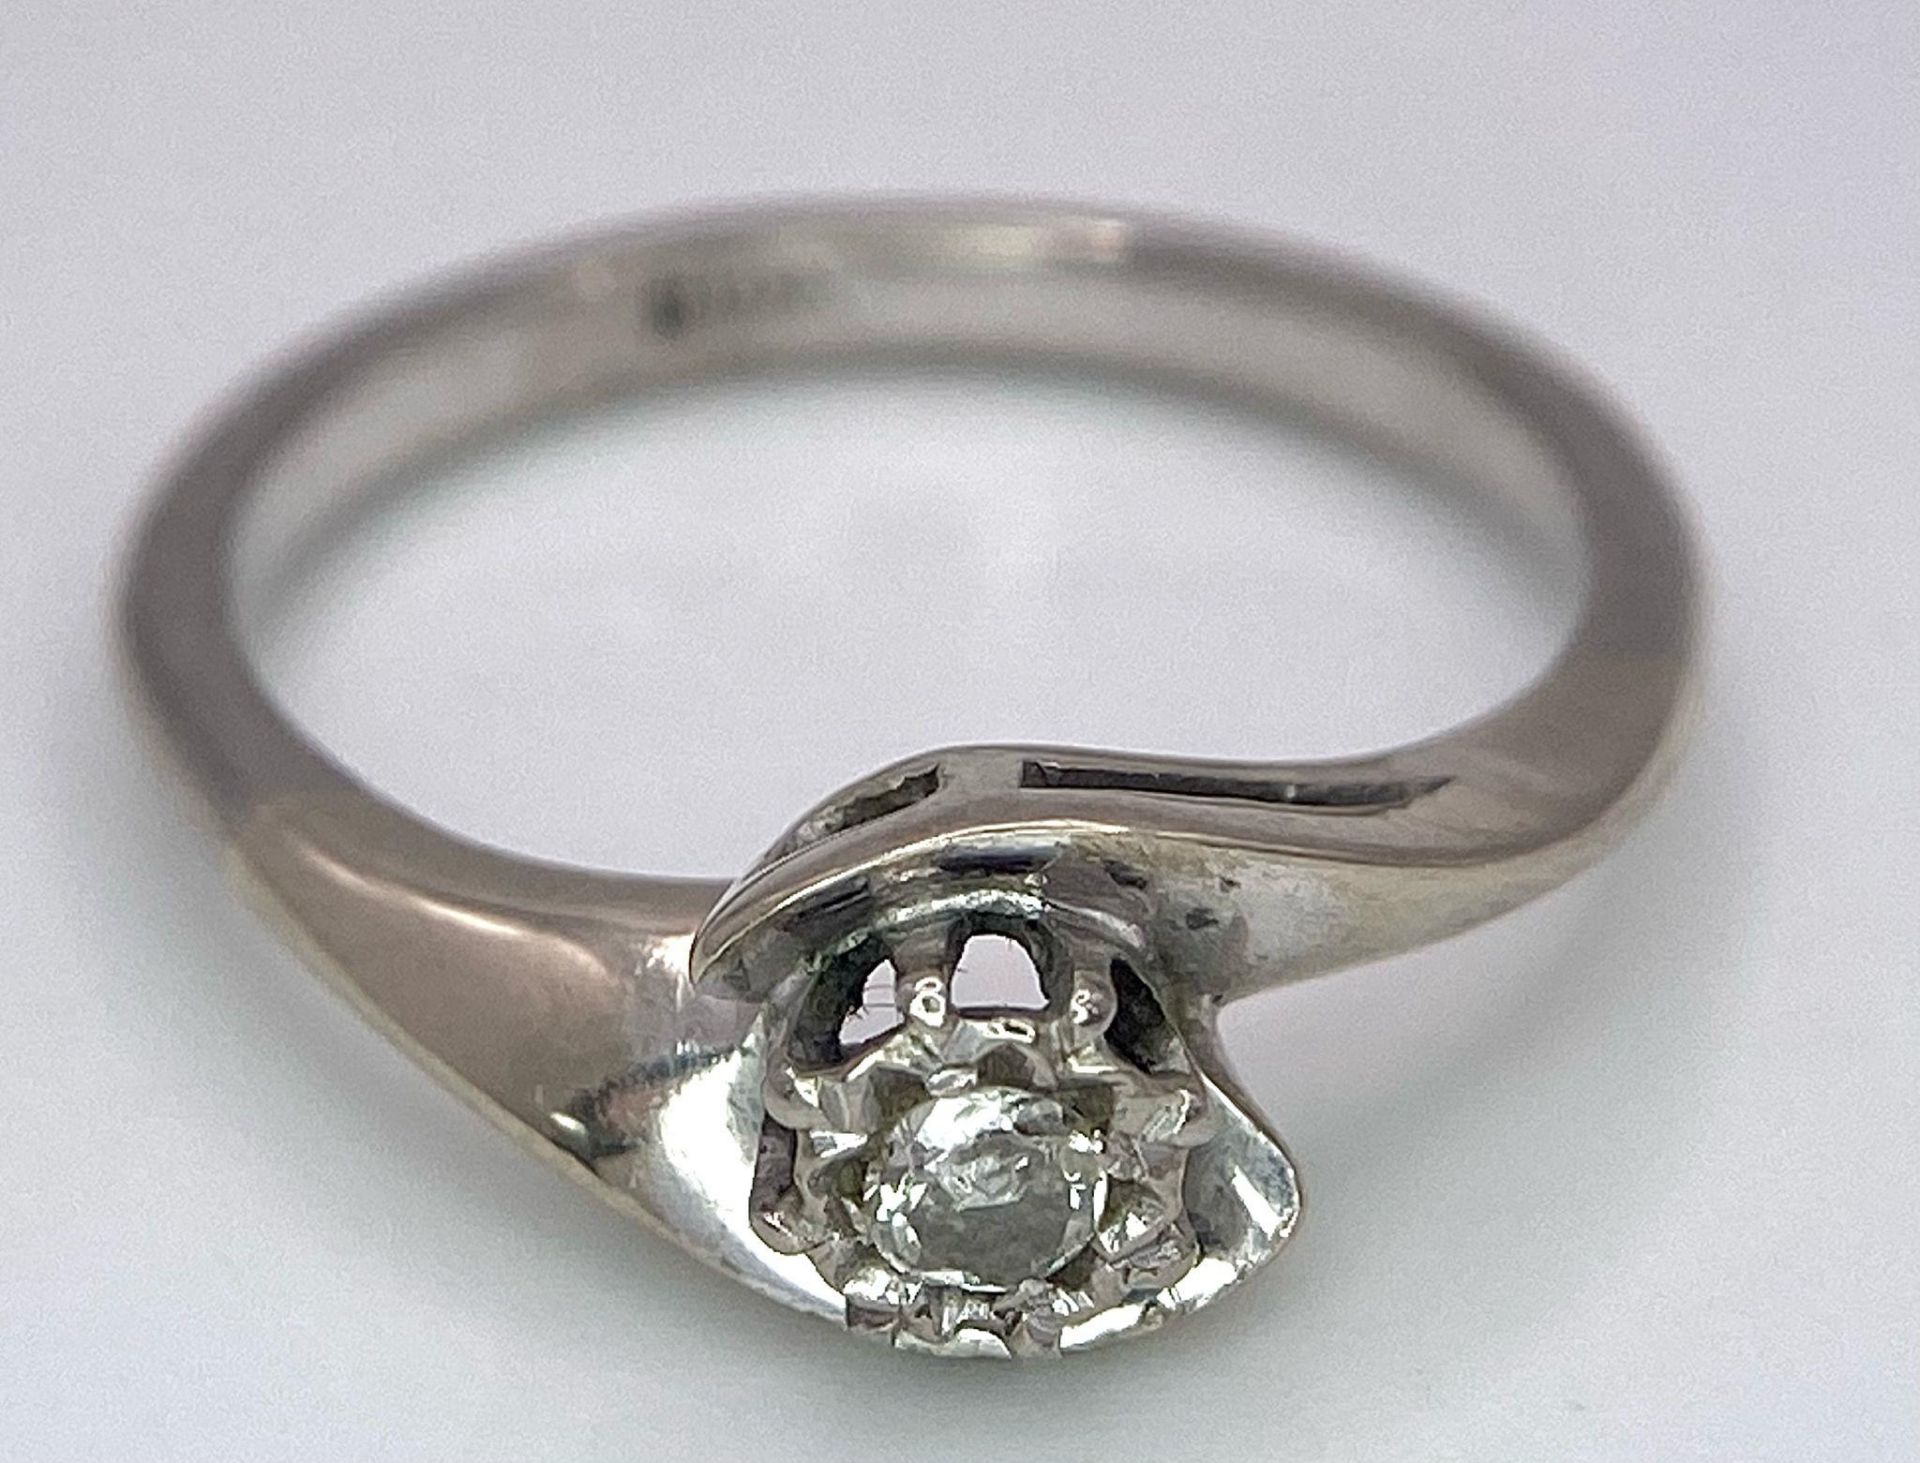 An 18K White Gold Diamond Crossover Ring. 0.10ct brilliant round cut diamond. Size N. 4g total - Image 4 of 6